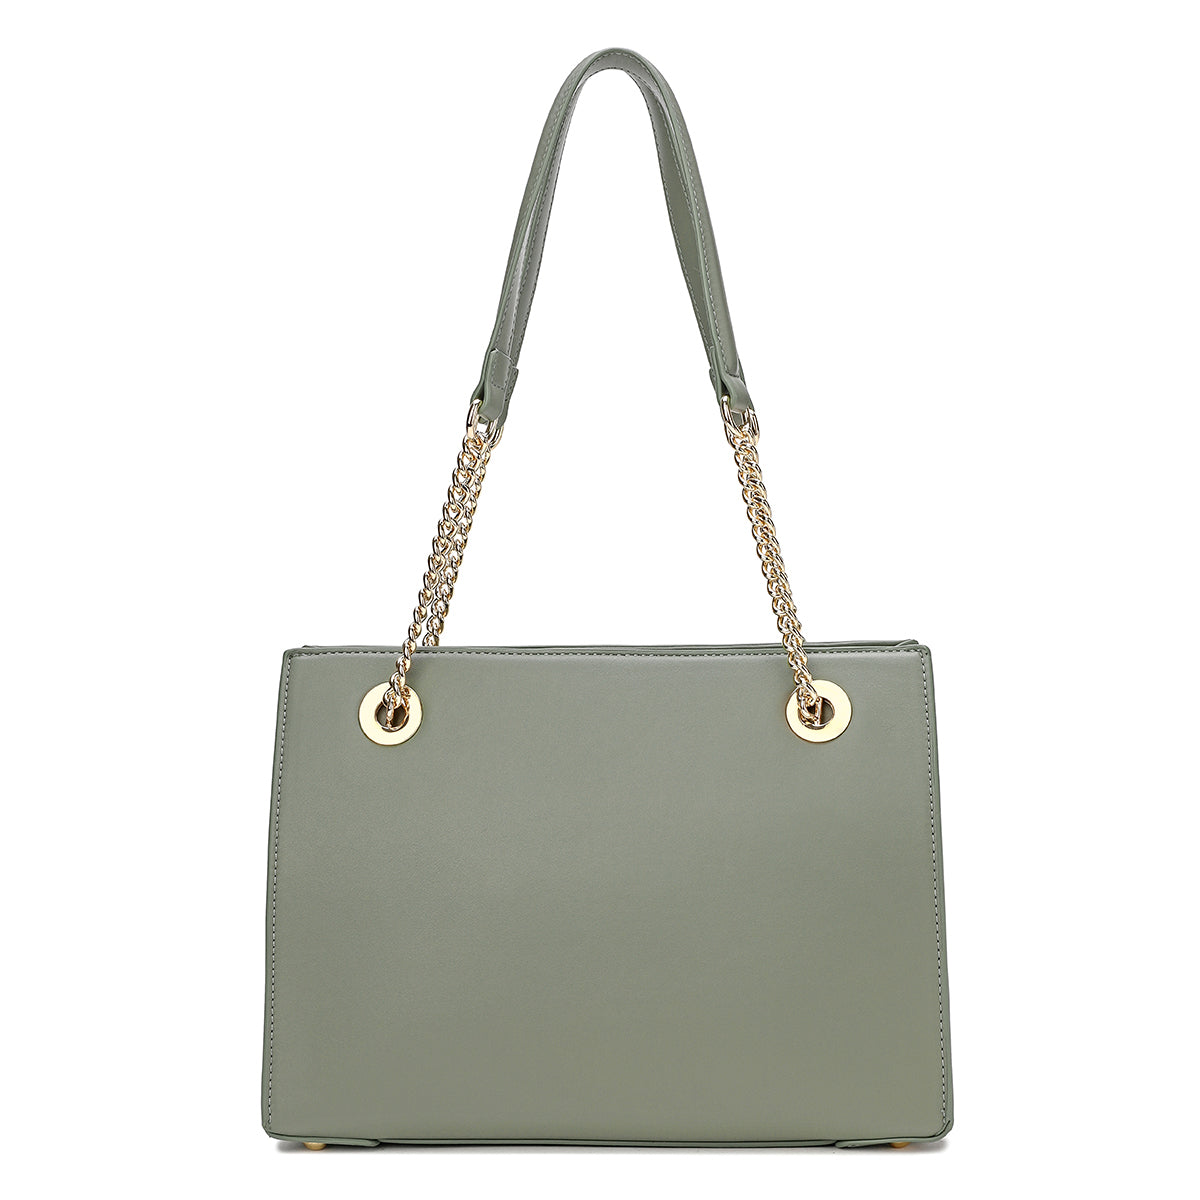 Handbag with a strap with a 29 cm wide golden chain in green or black